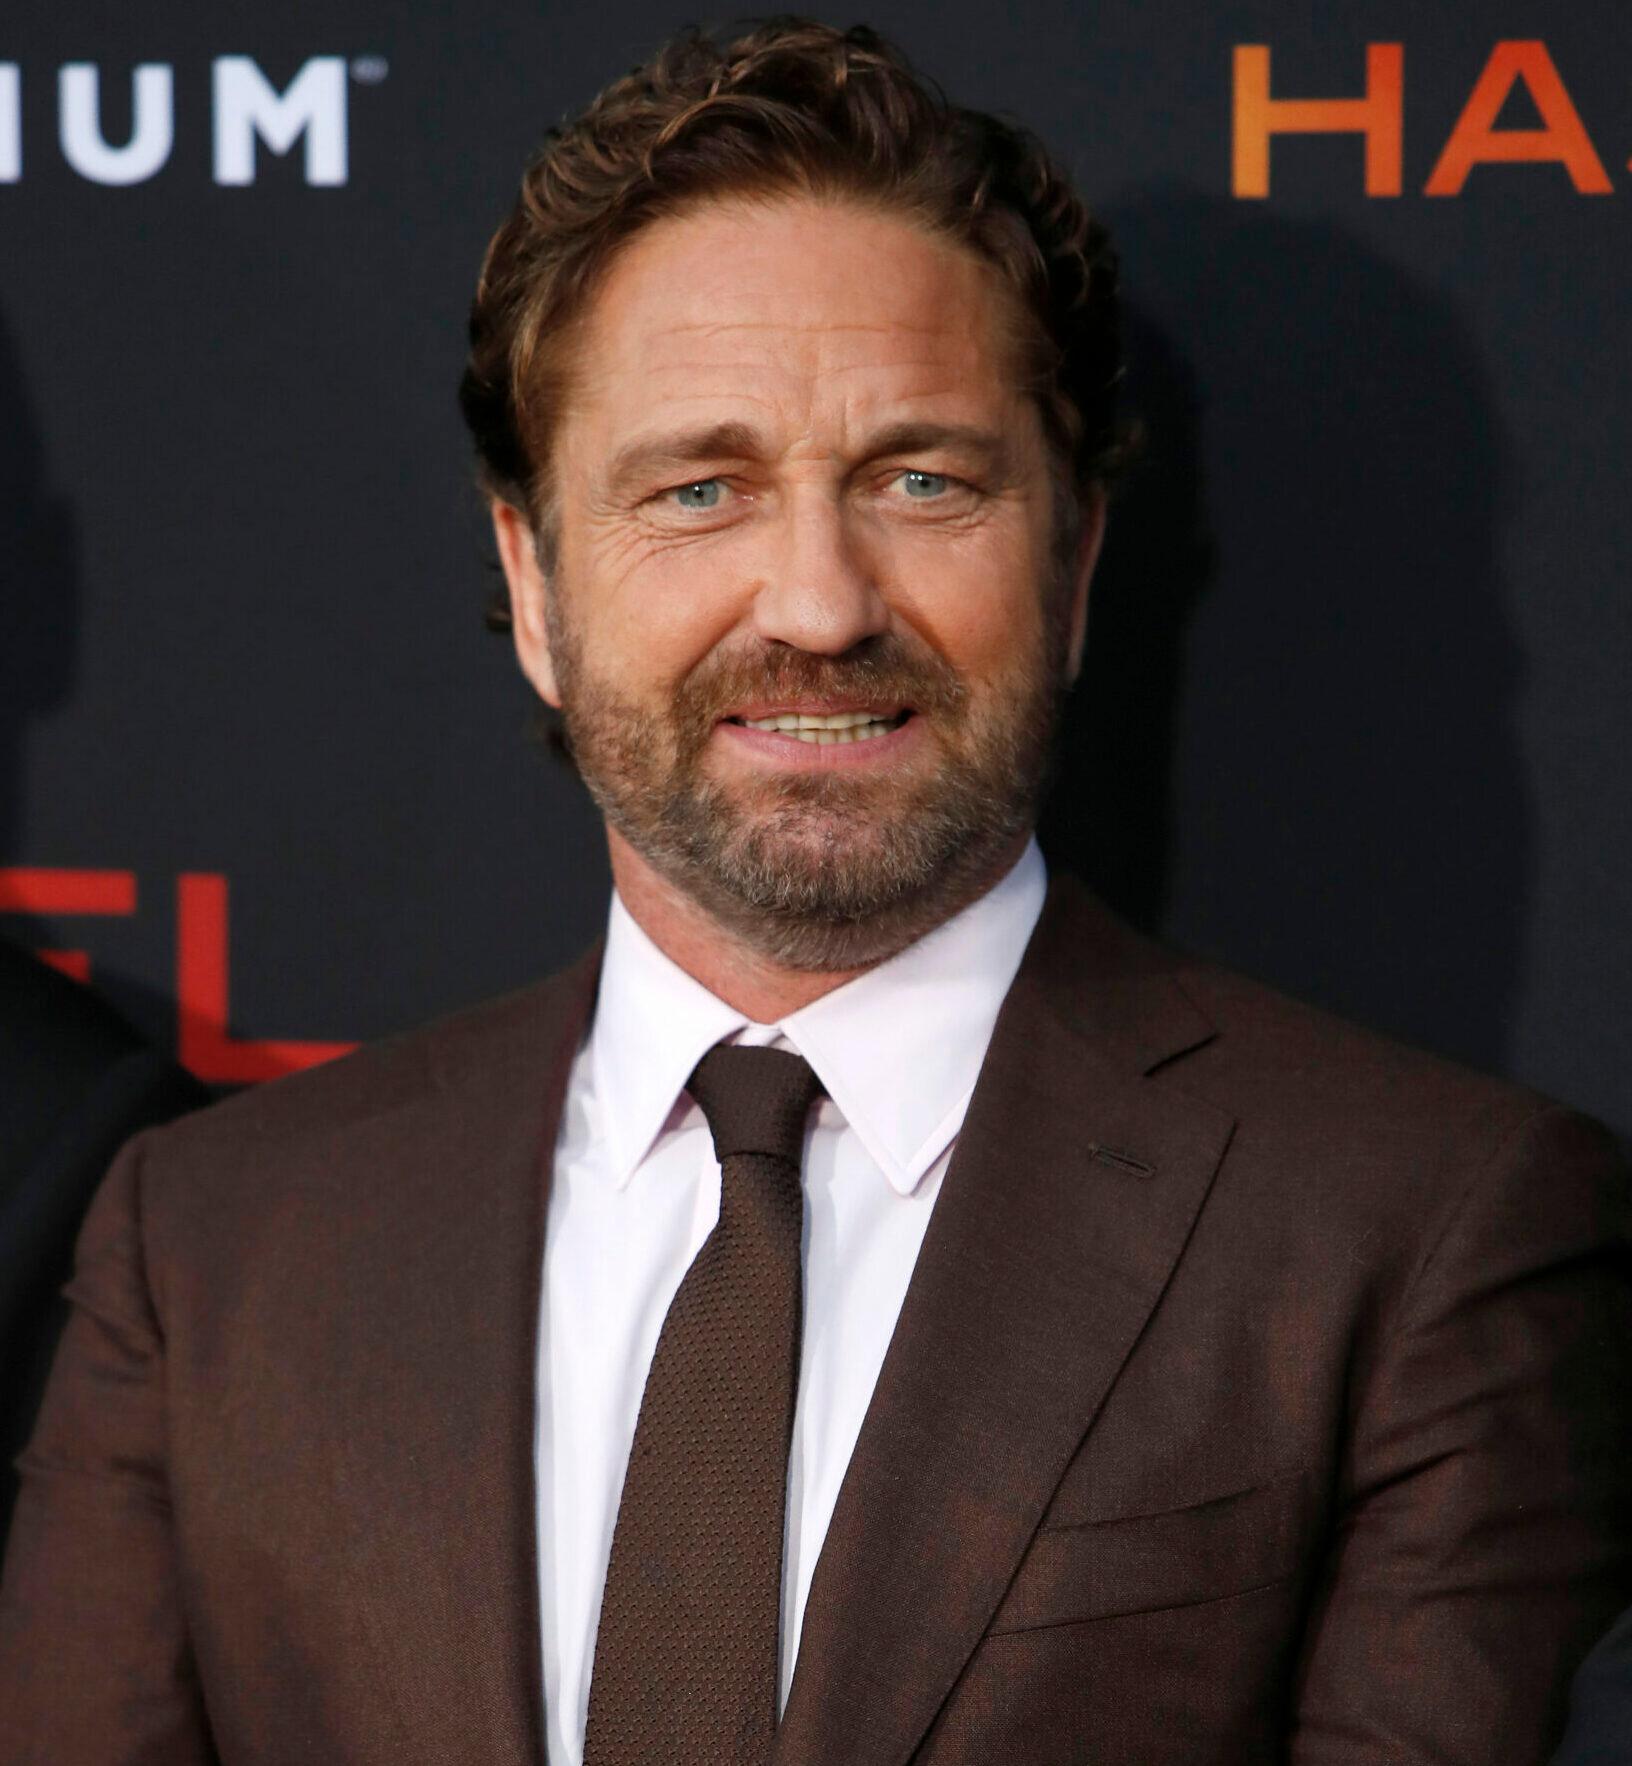 Gerard Butler Recalls Unknowingly Rubbing Phosphoric Acid All Over His Face On The Set Of His New Movie 'Plane'